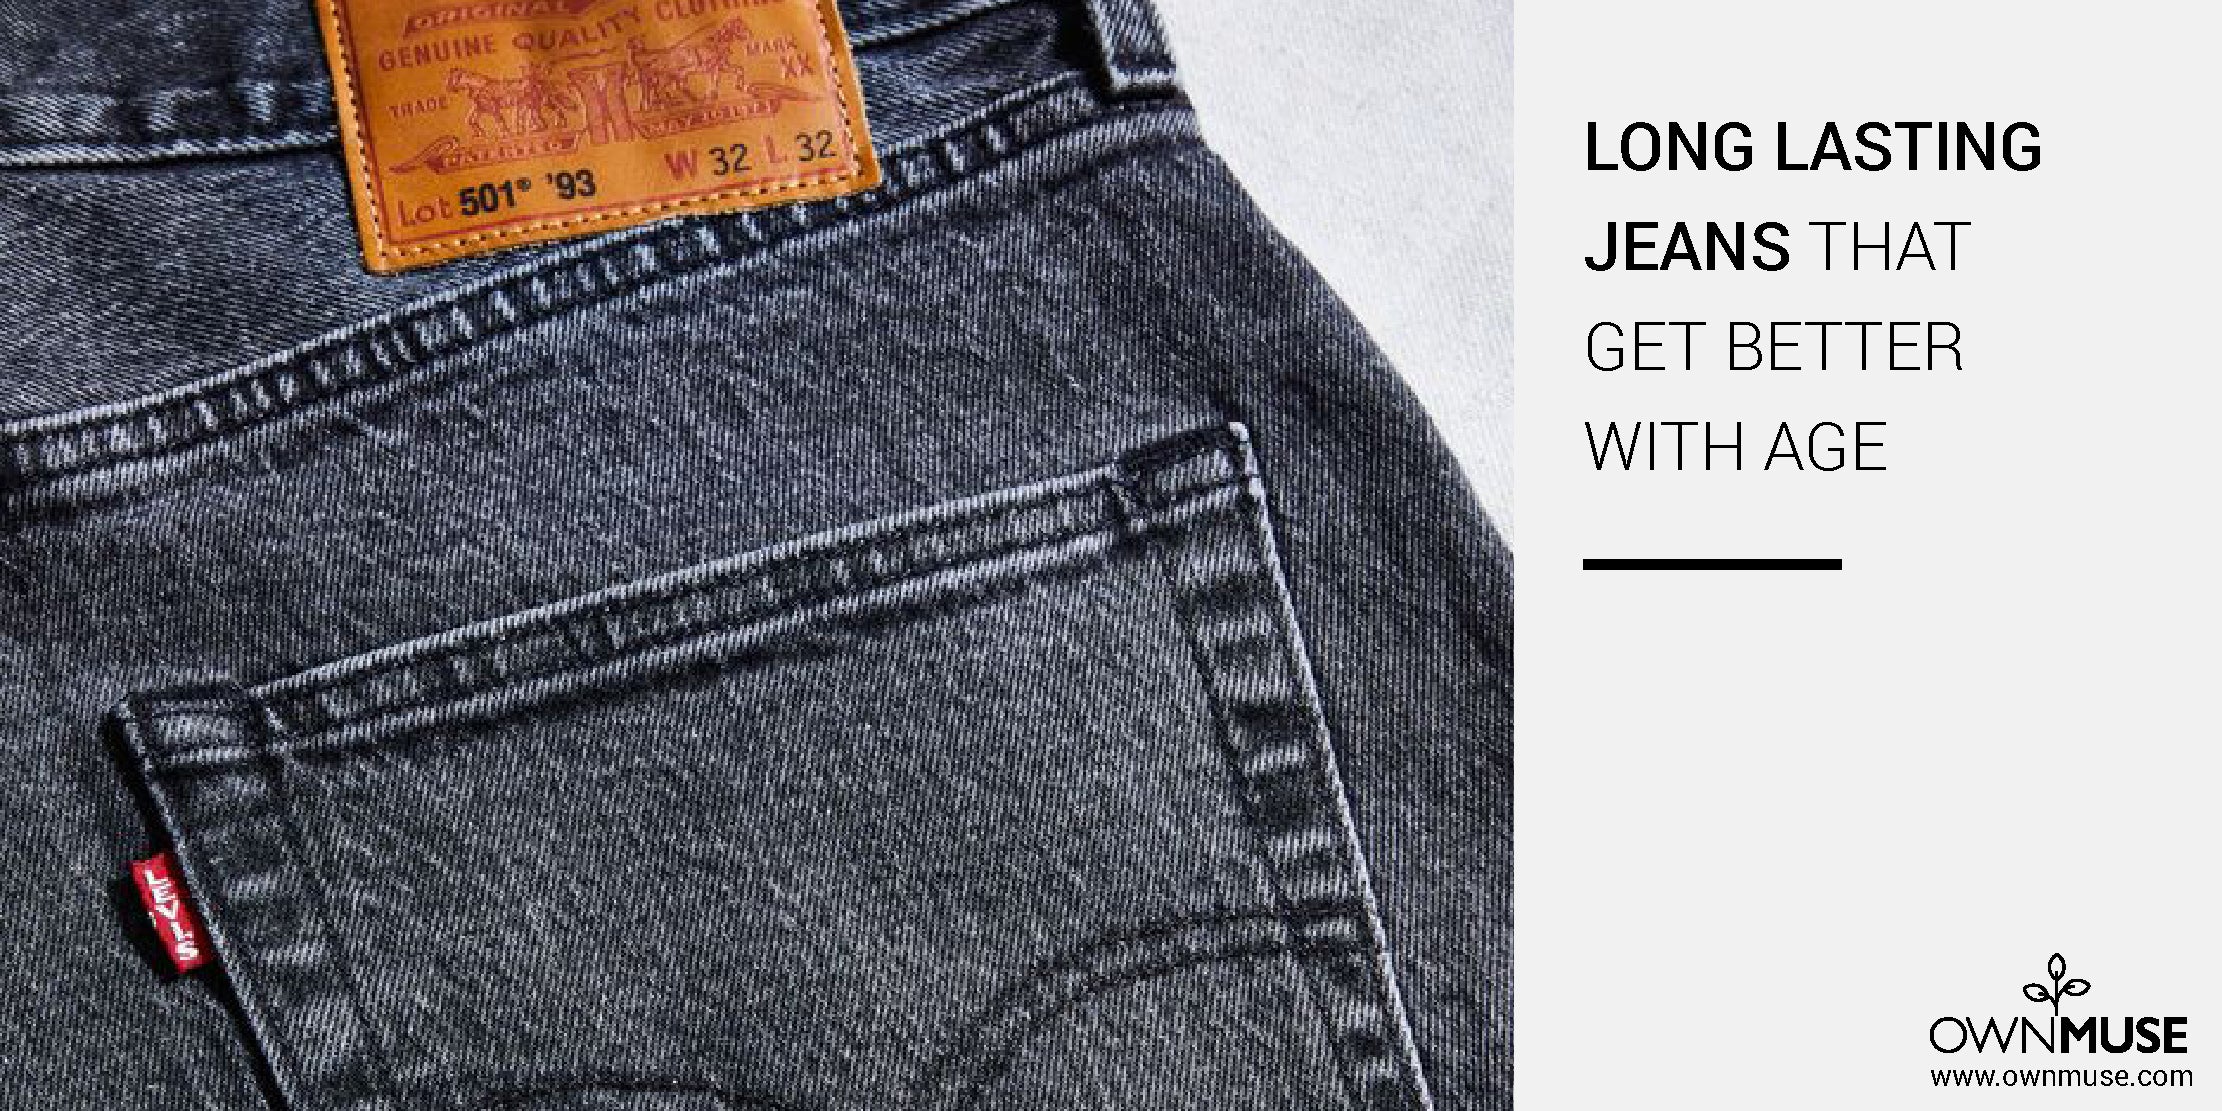 Levi's online Second-hand store 